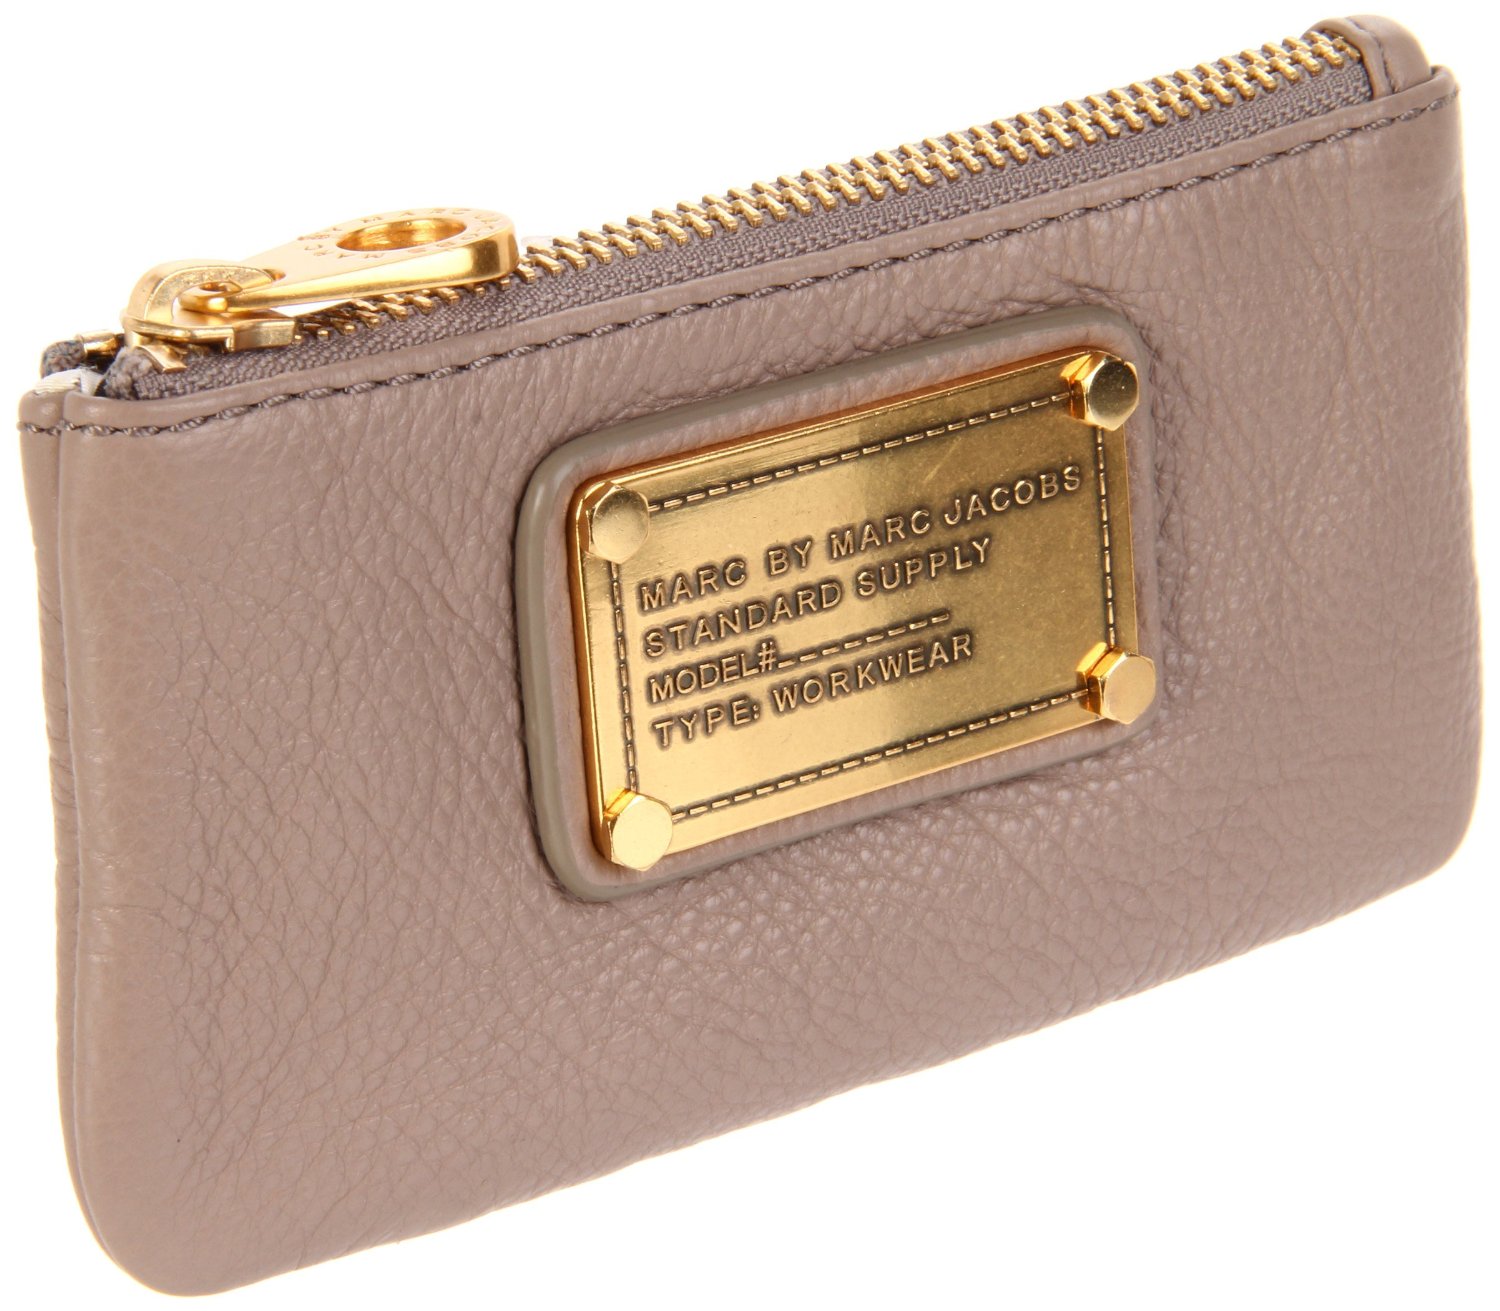 WATCH ME ACCESSORIZE MYSELF: SALE : MARC BY MARC JACOBS WALLET